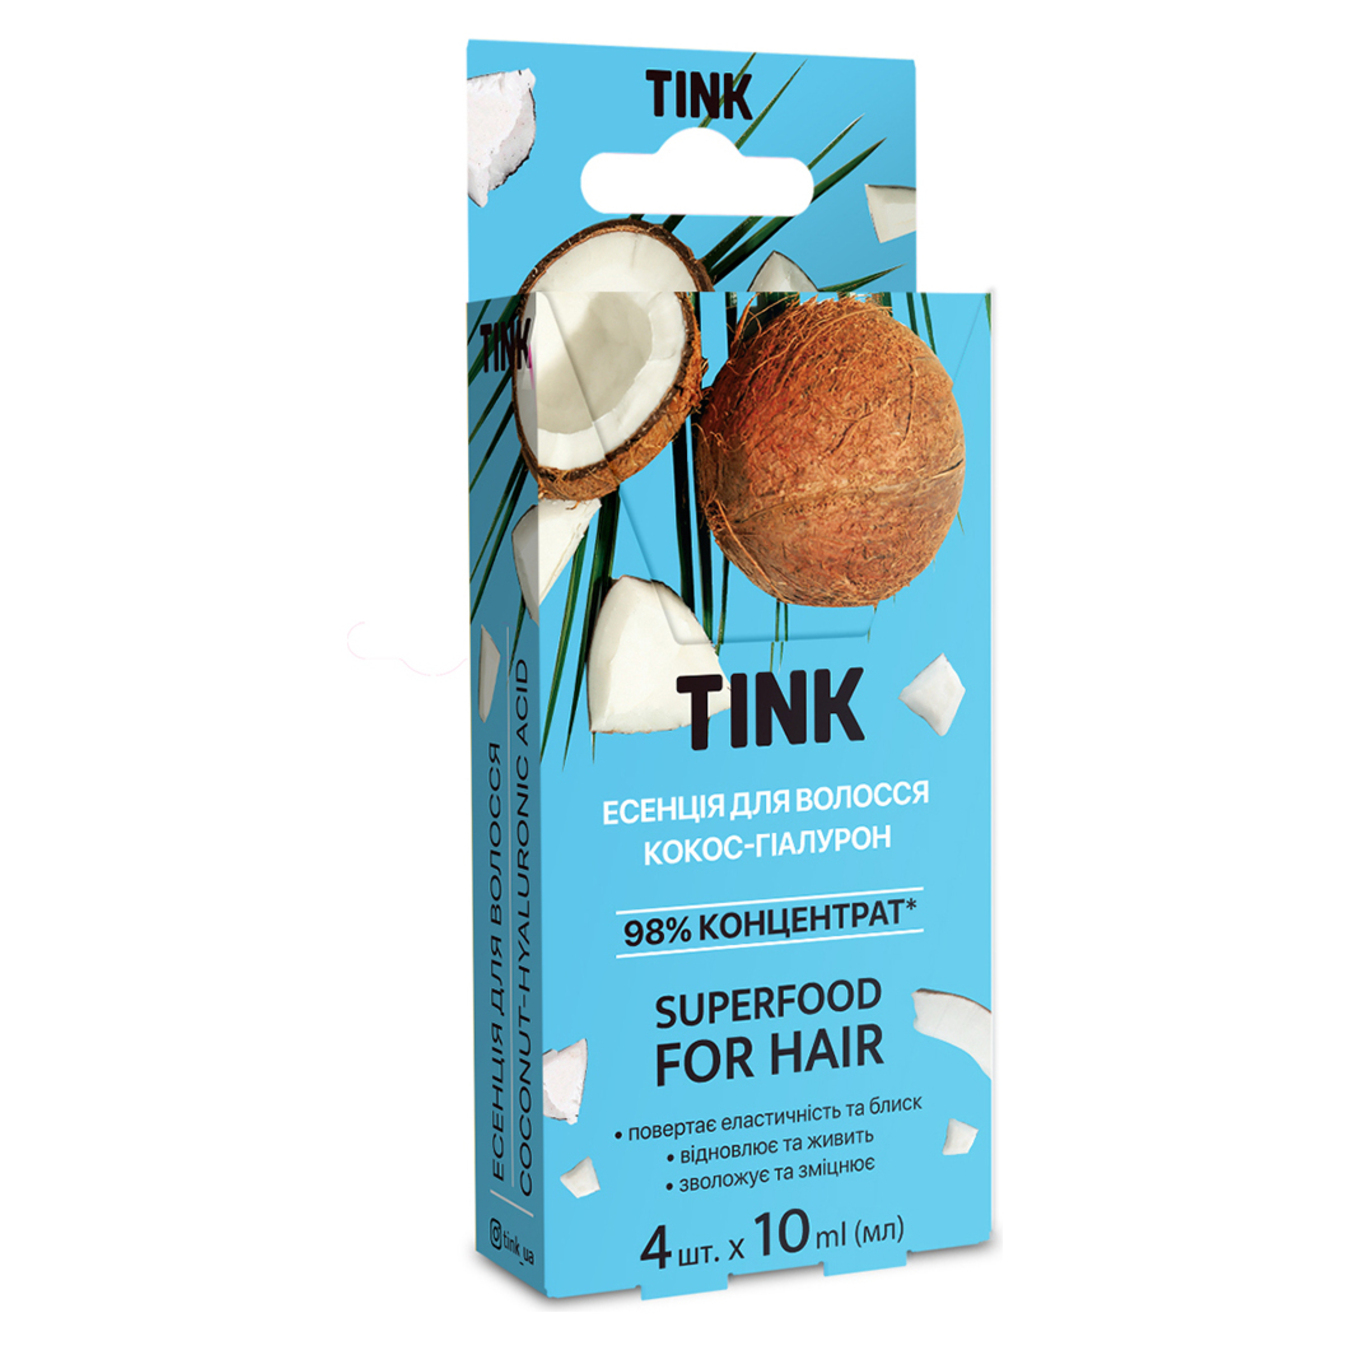 Tink Coconut-hyaluron essence for hair concentrated 4*10ml